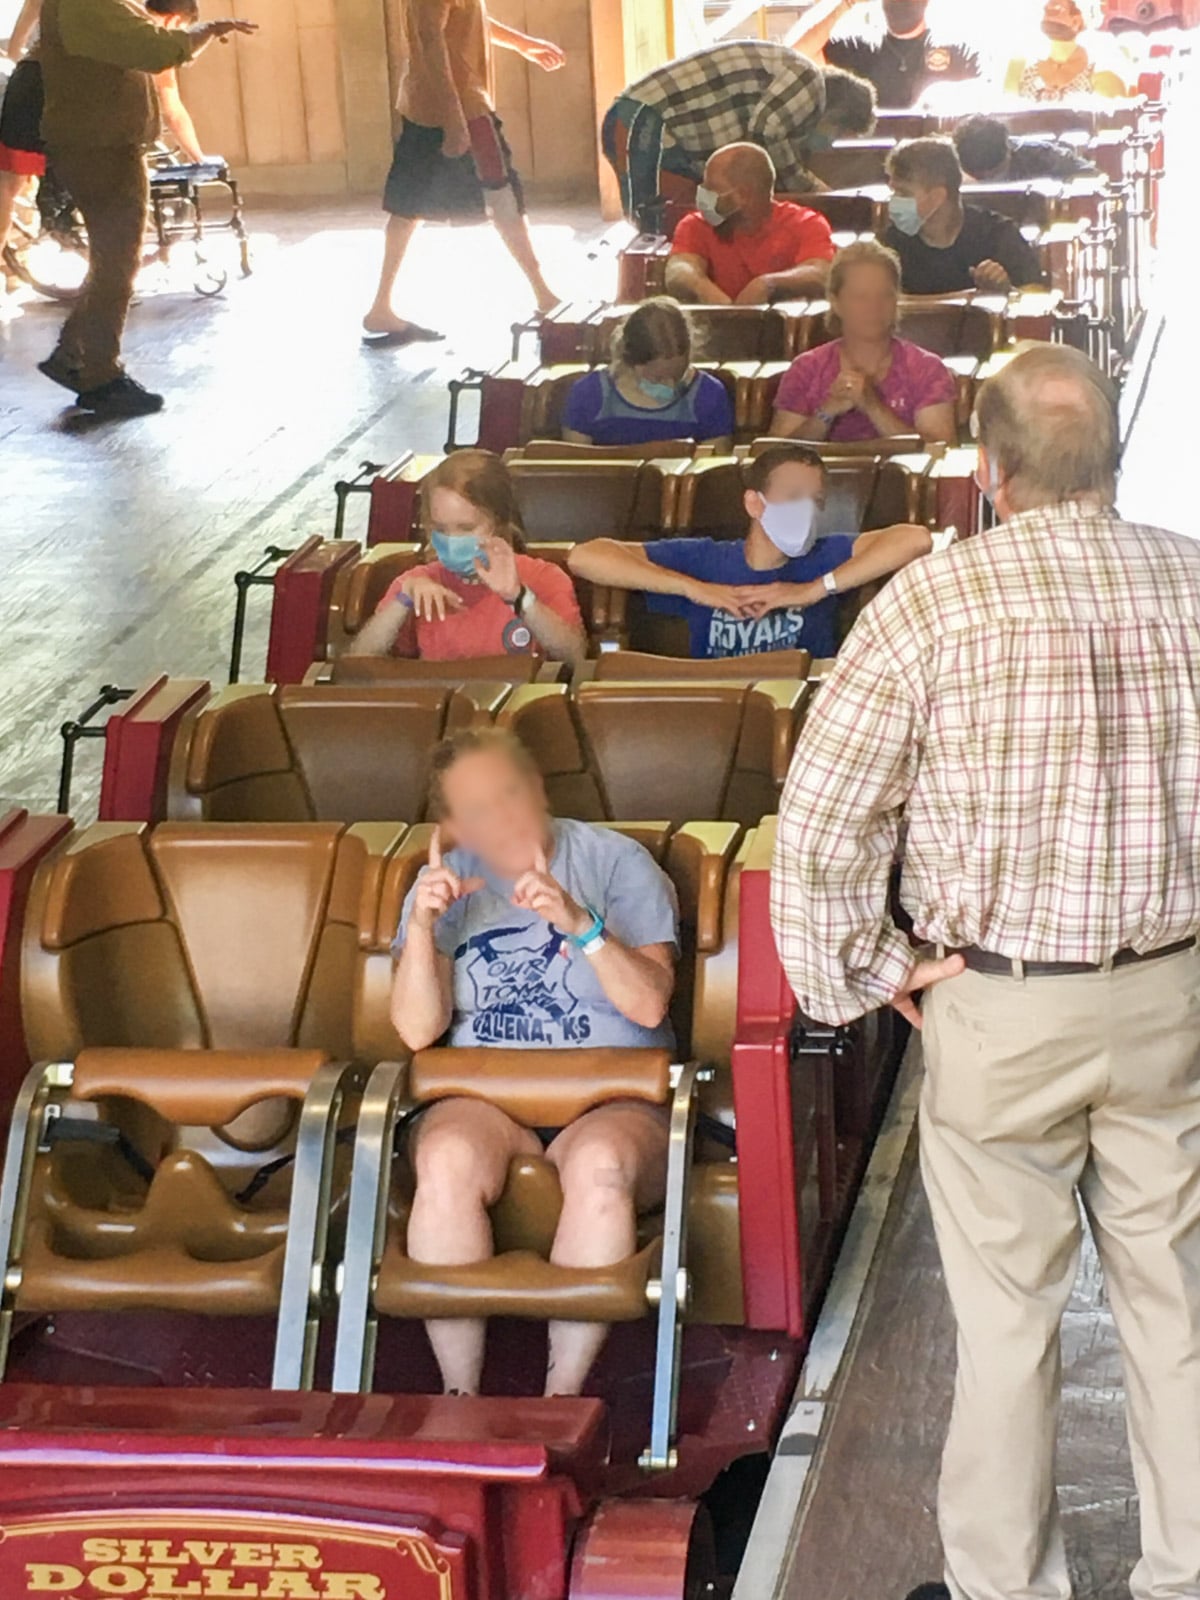 Roller coaster with seats skipped at Silver Dollar City